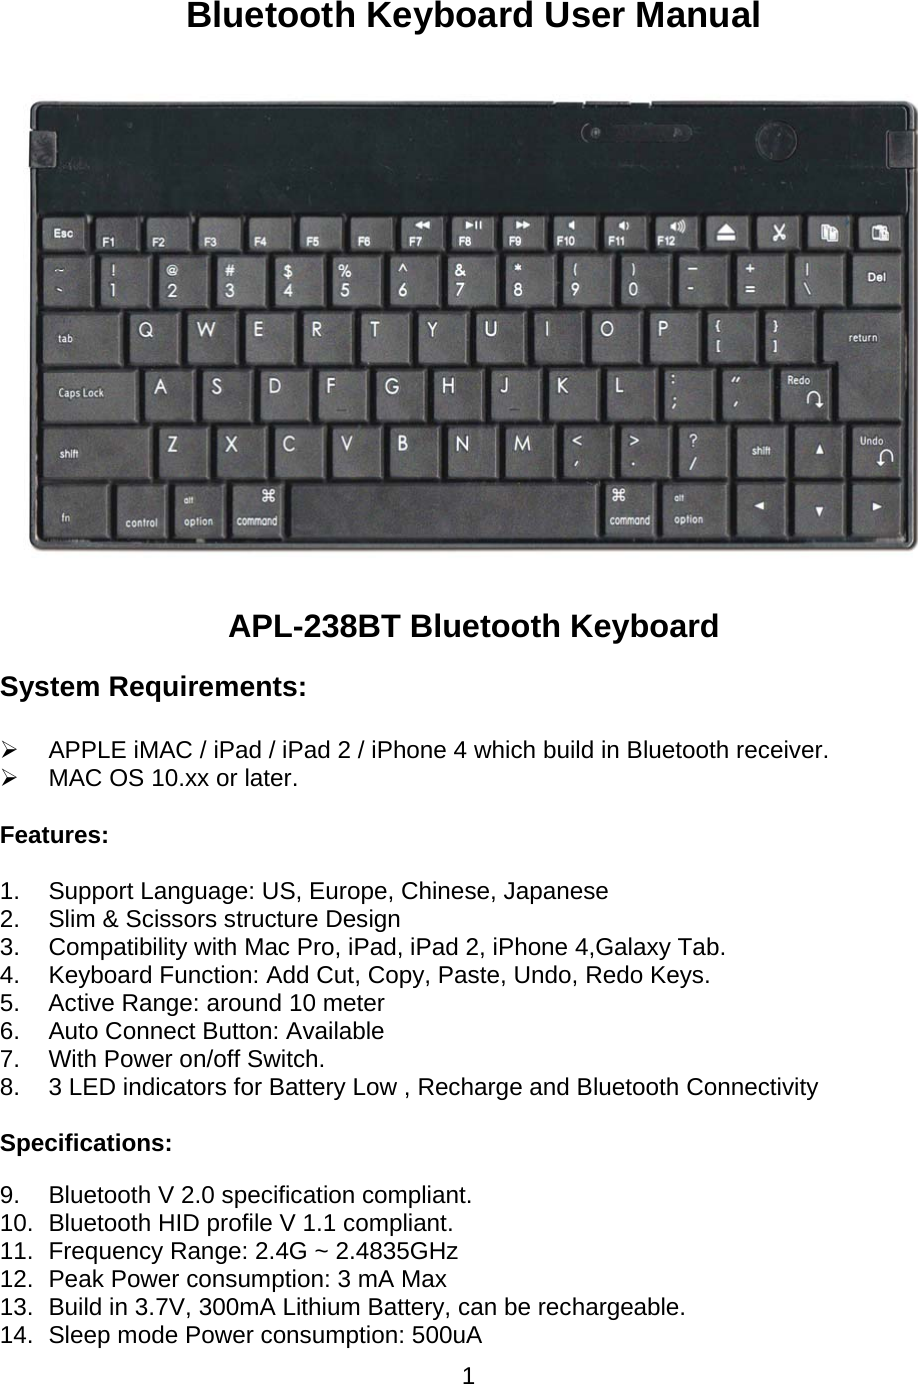 1Bluetooth Keyboard User Manual  APL-238BT Bluetooth Keyboard System Requirements: ¾  APPLE iMAC / iPad / iPad 2 / iPhone 4 which build in Bluetooth receiver. ¾  MAC OS 10.xx or later. Features: 1.  Support Language: US, Europe, Chinese, Japanese 2.  Slim &amp; Scissors structure Design 3.  Compatibility with Mac Pro, iPad, iPad 2, iPhone 4,Galaxy Tab. 4.  Keyboard Function: Add Cut, Copy, Paste, Undo, Redo Keys. 5.  Active Range: around 10 meter 6.  Auto Connect Button: Available  7.  With Power on/off Switch. 8.  3 LED indicators for Battery Low , Recharge and Bluetooth Connectivity  Specifications: 9.  Bluetooth V 2.0 specification compliant. 10.  Bluetooth HID profile V 1.1 compliant. 11.  Frequency Range: 2.4G ~ 2.4835GHz 12.  Peak Power consumption: 3 mA Max 13.  Build in 3.7V, 300mA Lithium Battery, can be rechargeable. 14.  Sleep mode Power consumption: 500uA 